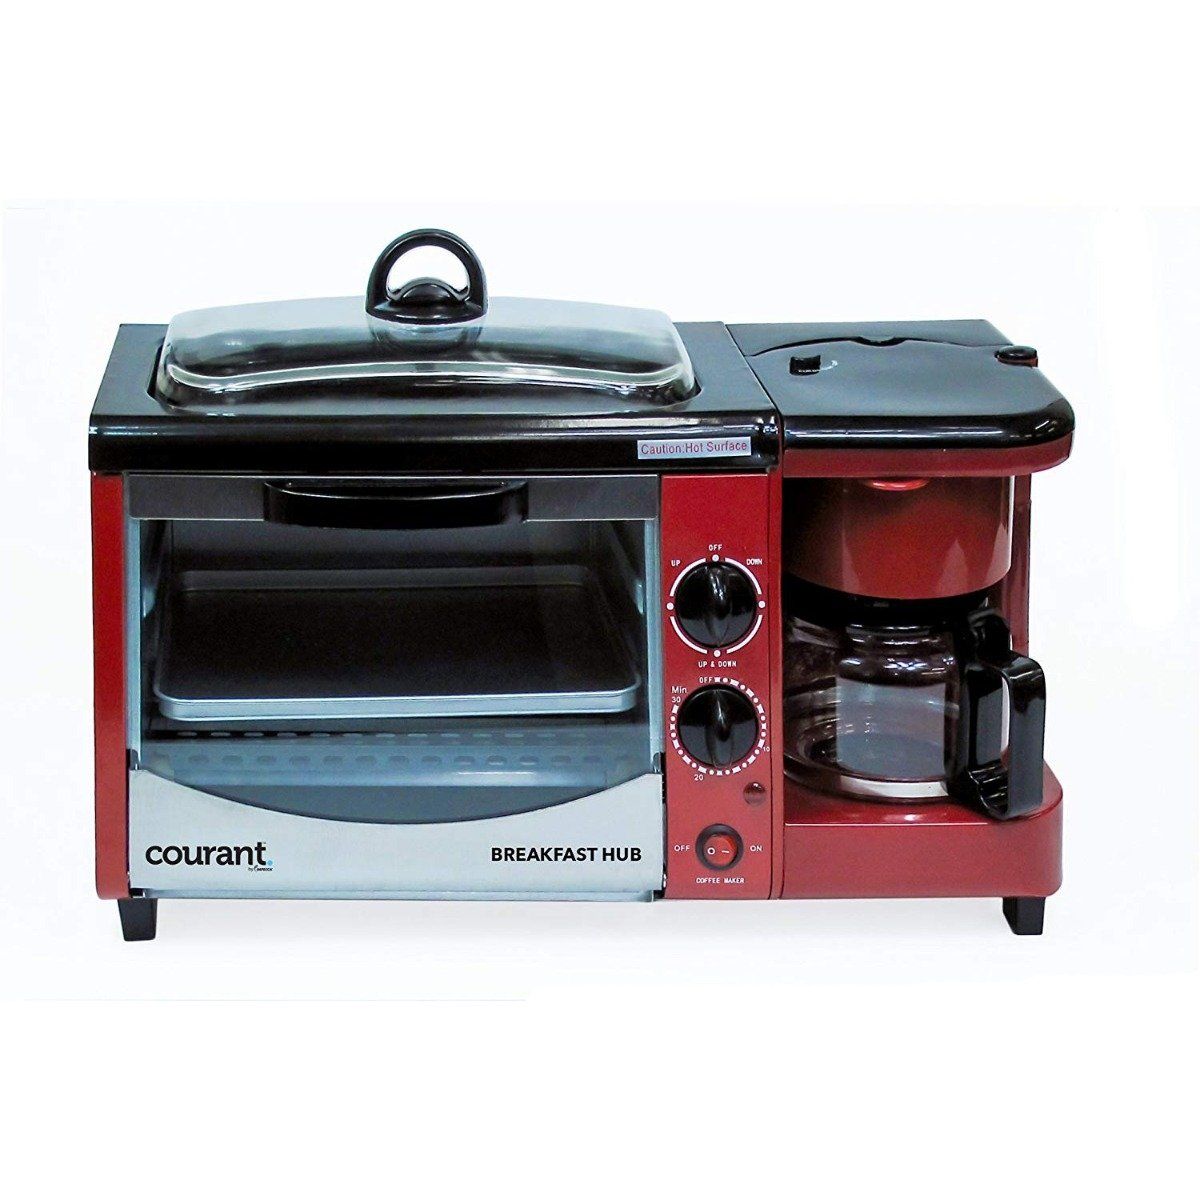 Courant 3-IN-1 Multifunction Breakfast Hub / Red